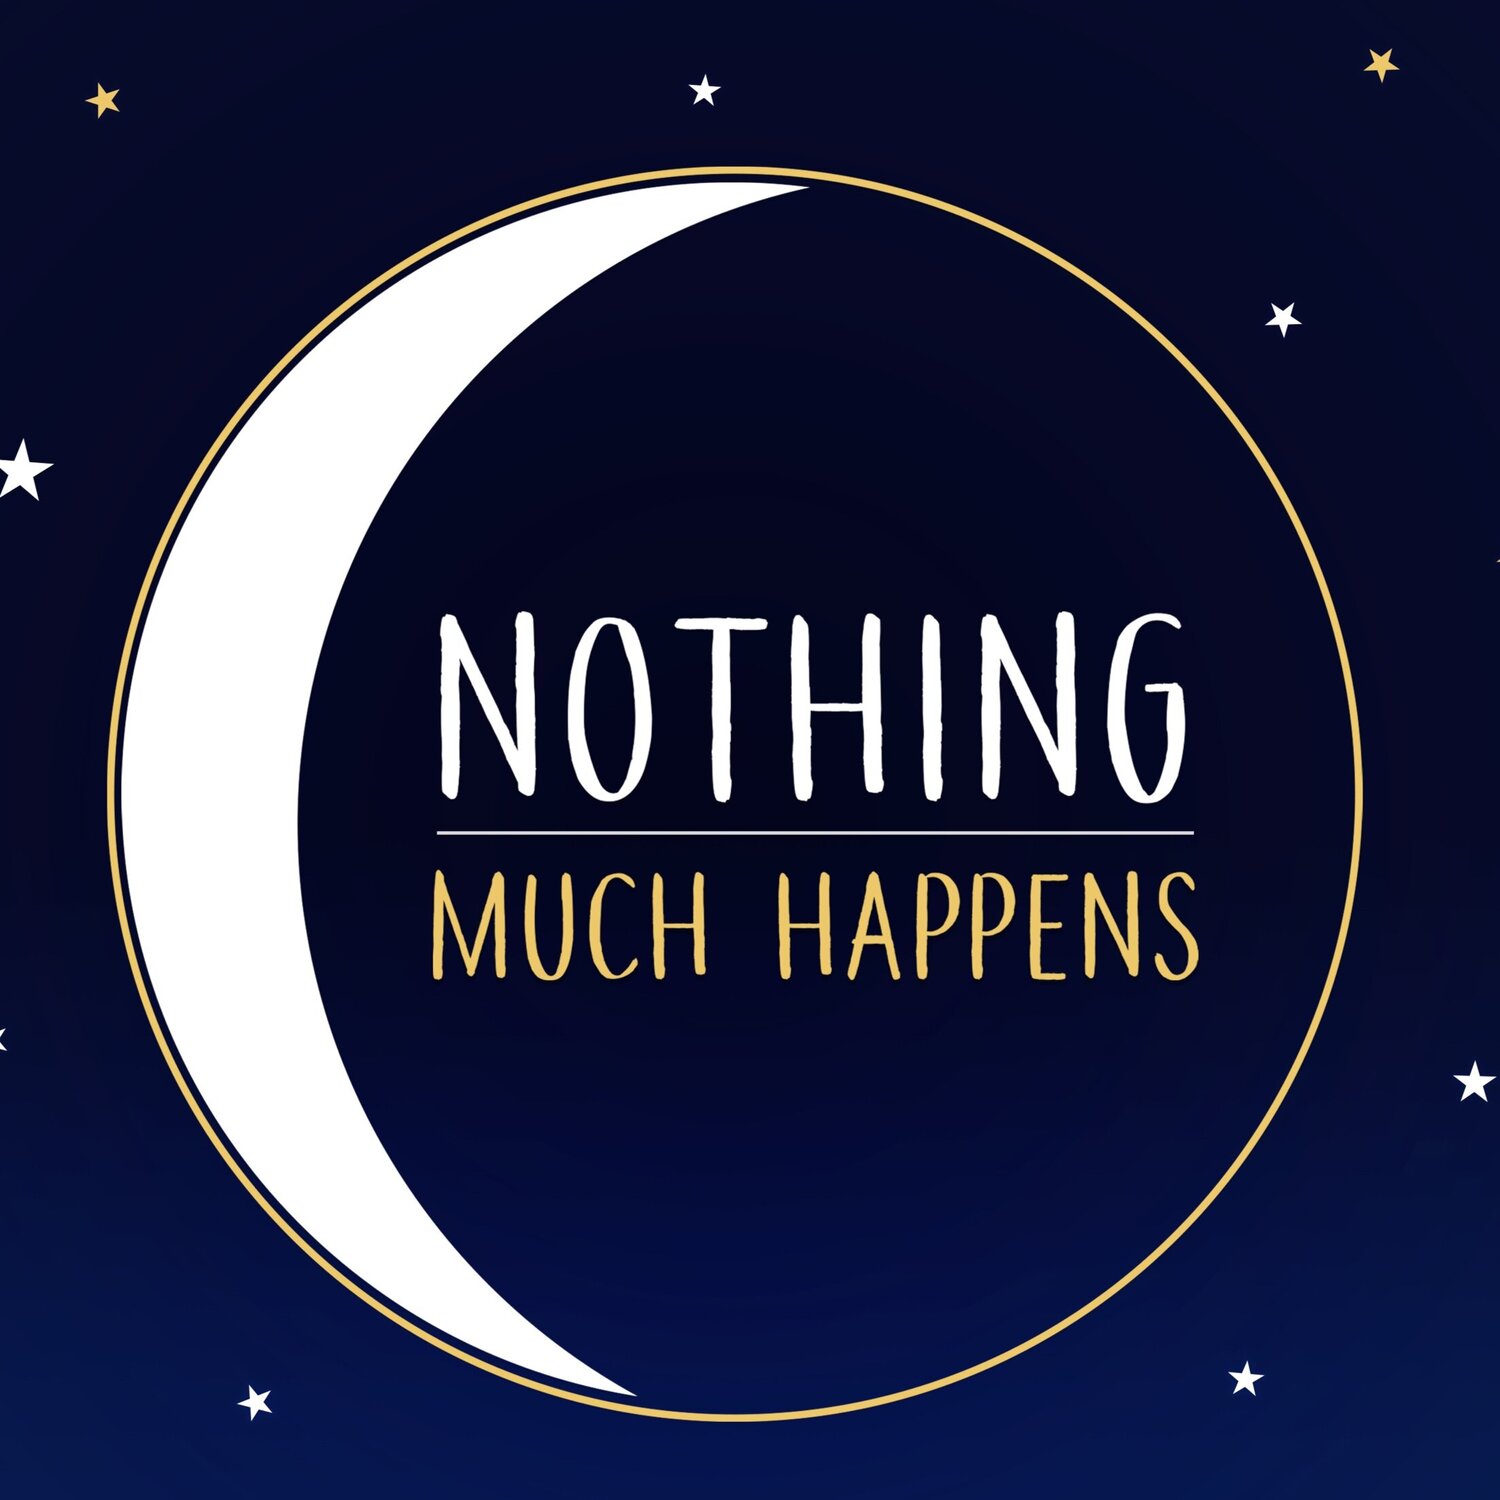 Nothing much happens